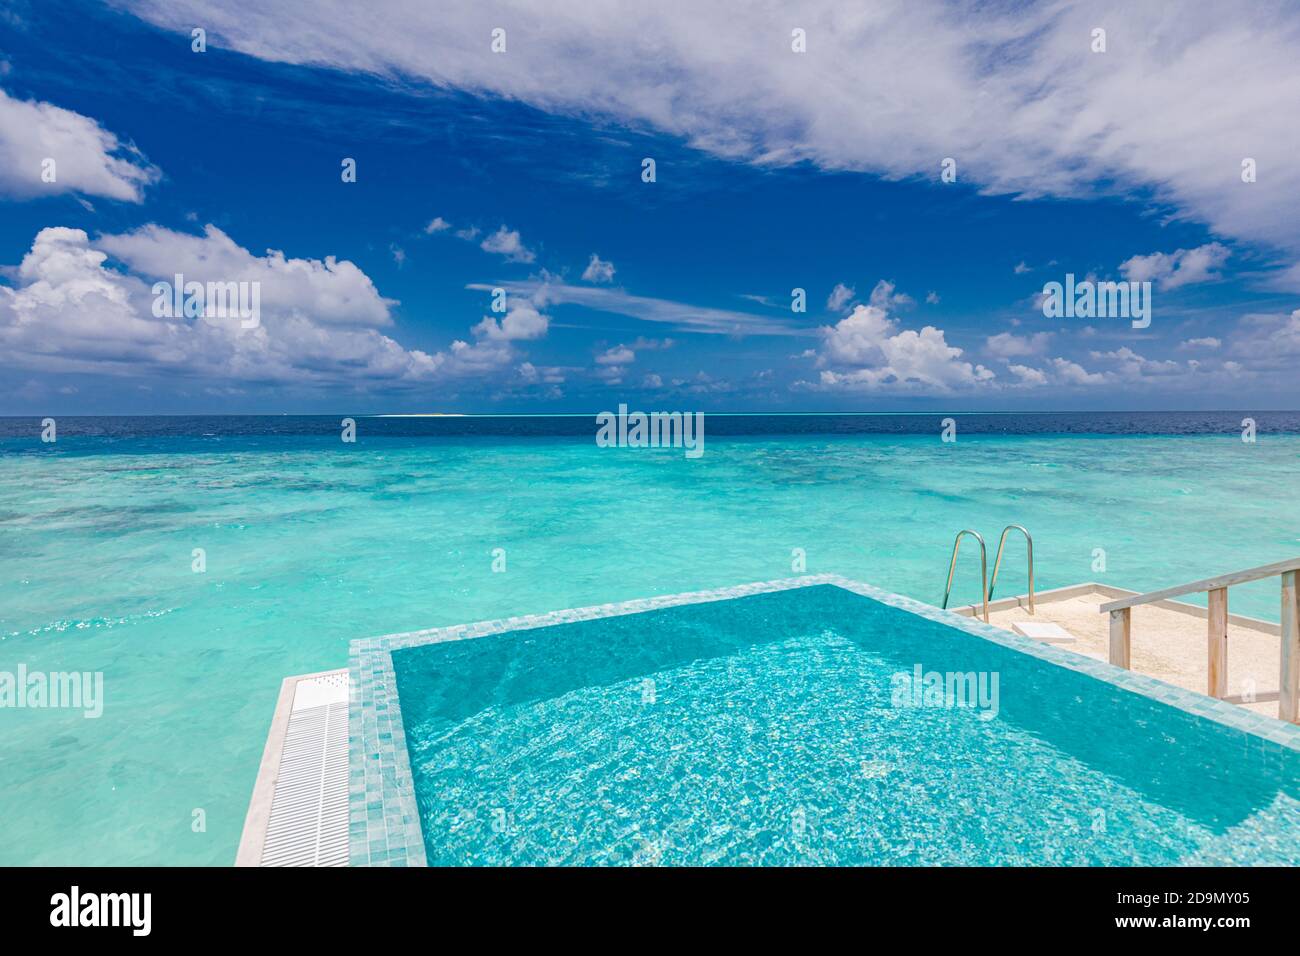 Infinity swimming pool with sea and ocean view on blue sky background. Luxury infinity pool over amazing turquoise lagoon and ladder into the water Stock Photo